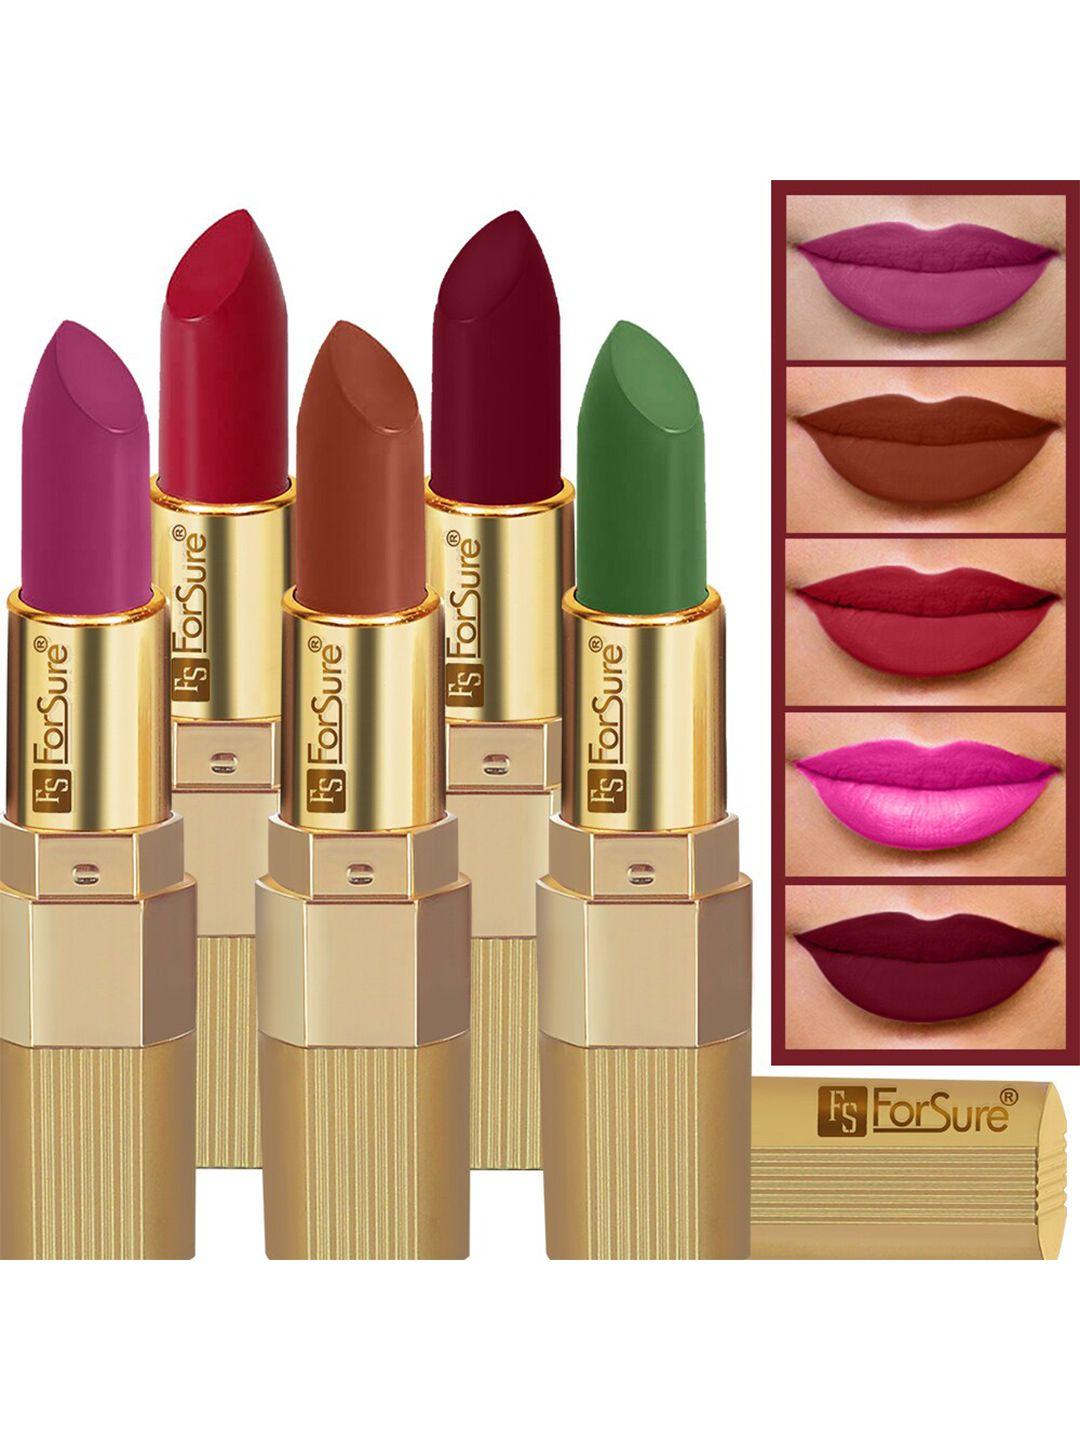 forsure xpression set of 5 long-lasting & highly pigmented creamy textured matte lipstick - 3.5 g each